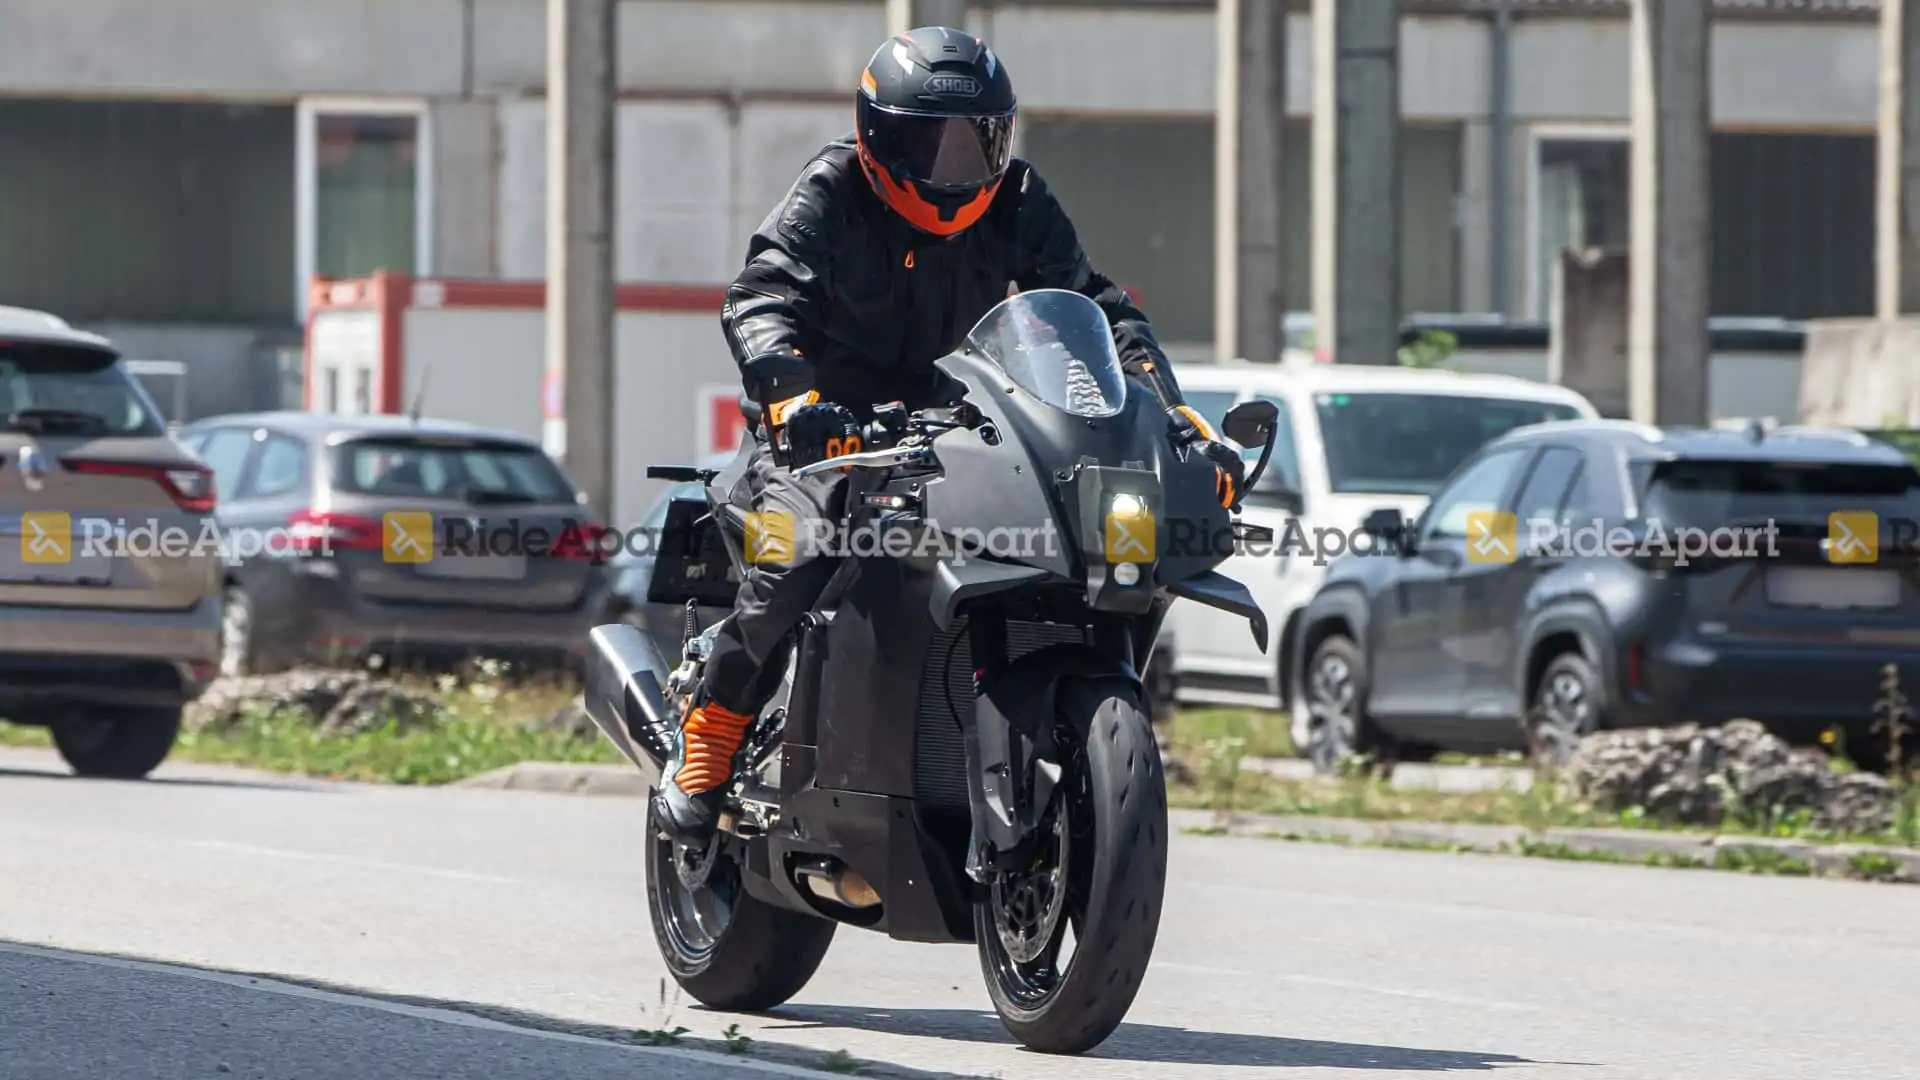 KTM RC 990 Sports Bike Spotted - The Faired Version of Duke 990 - portrait